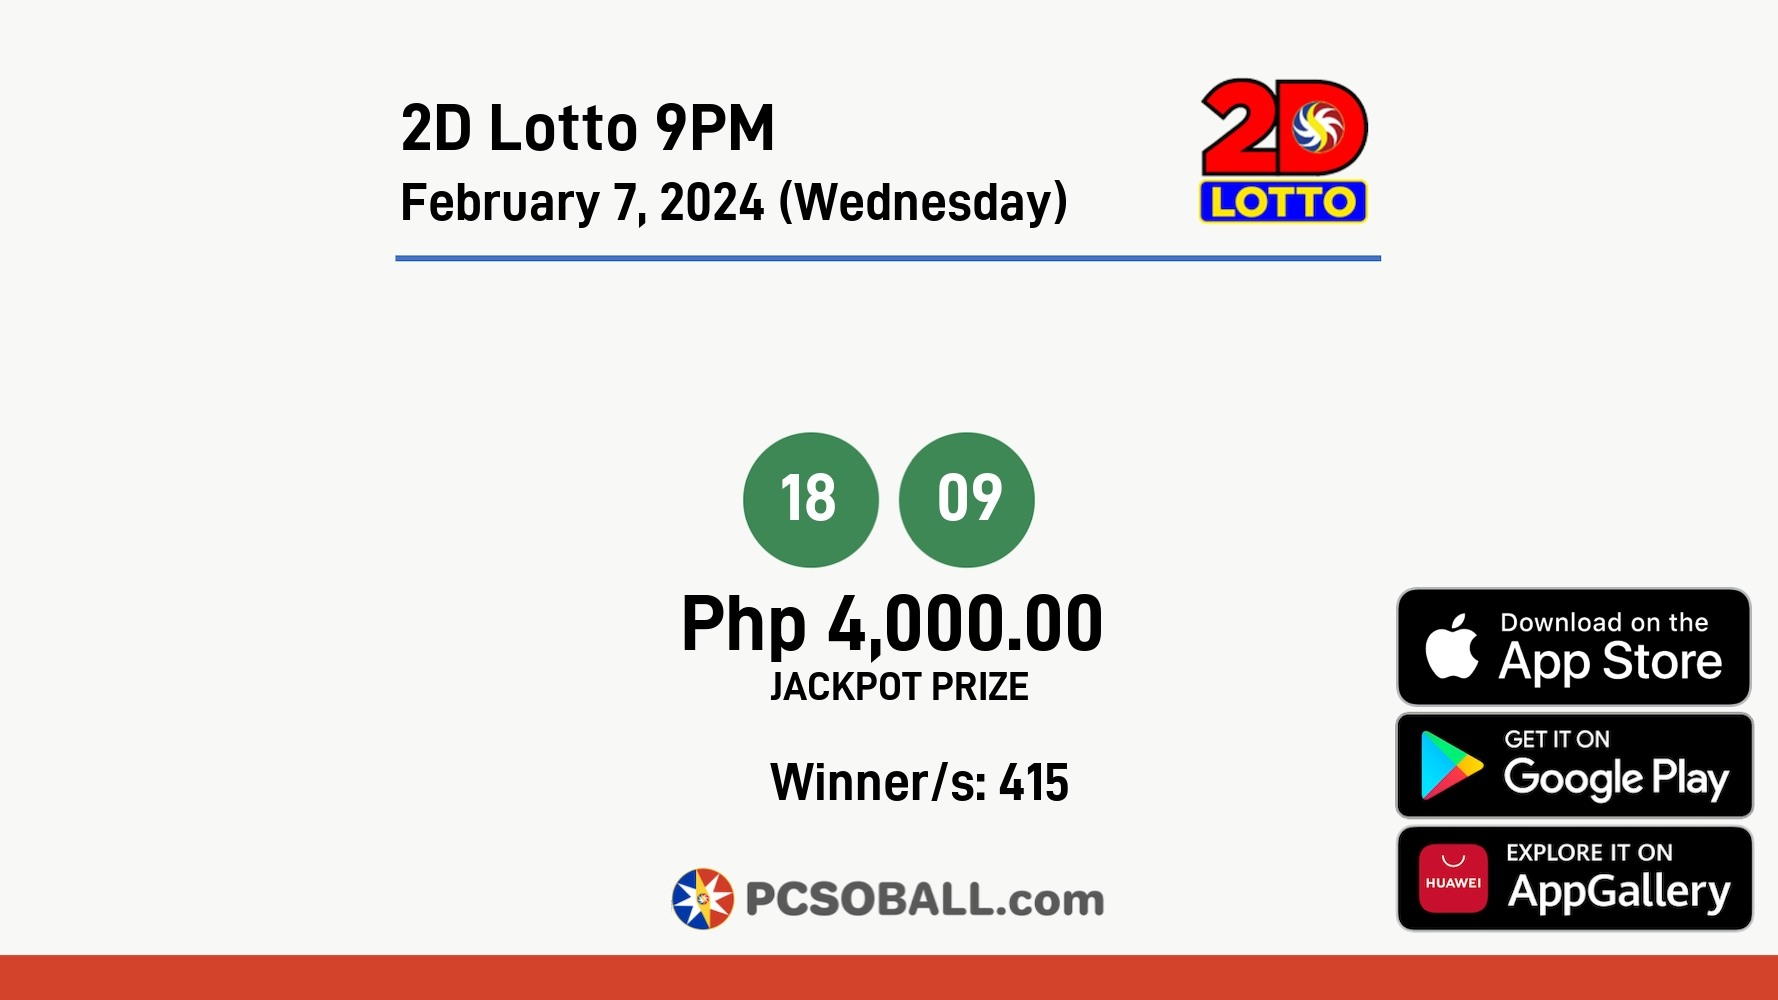 2D Lotto 9PM February 7, 2024 (Wednesday) Result